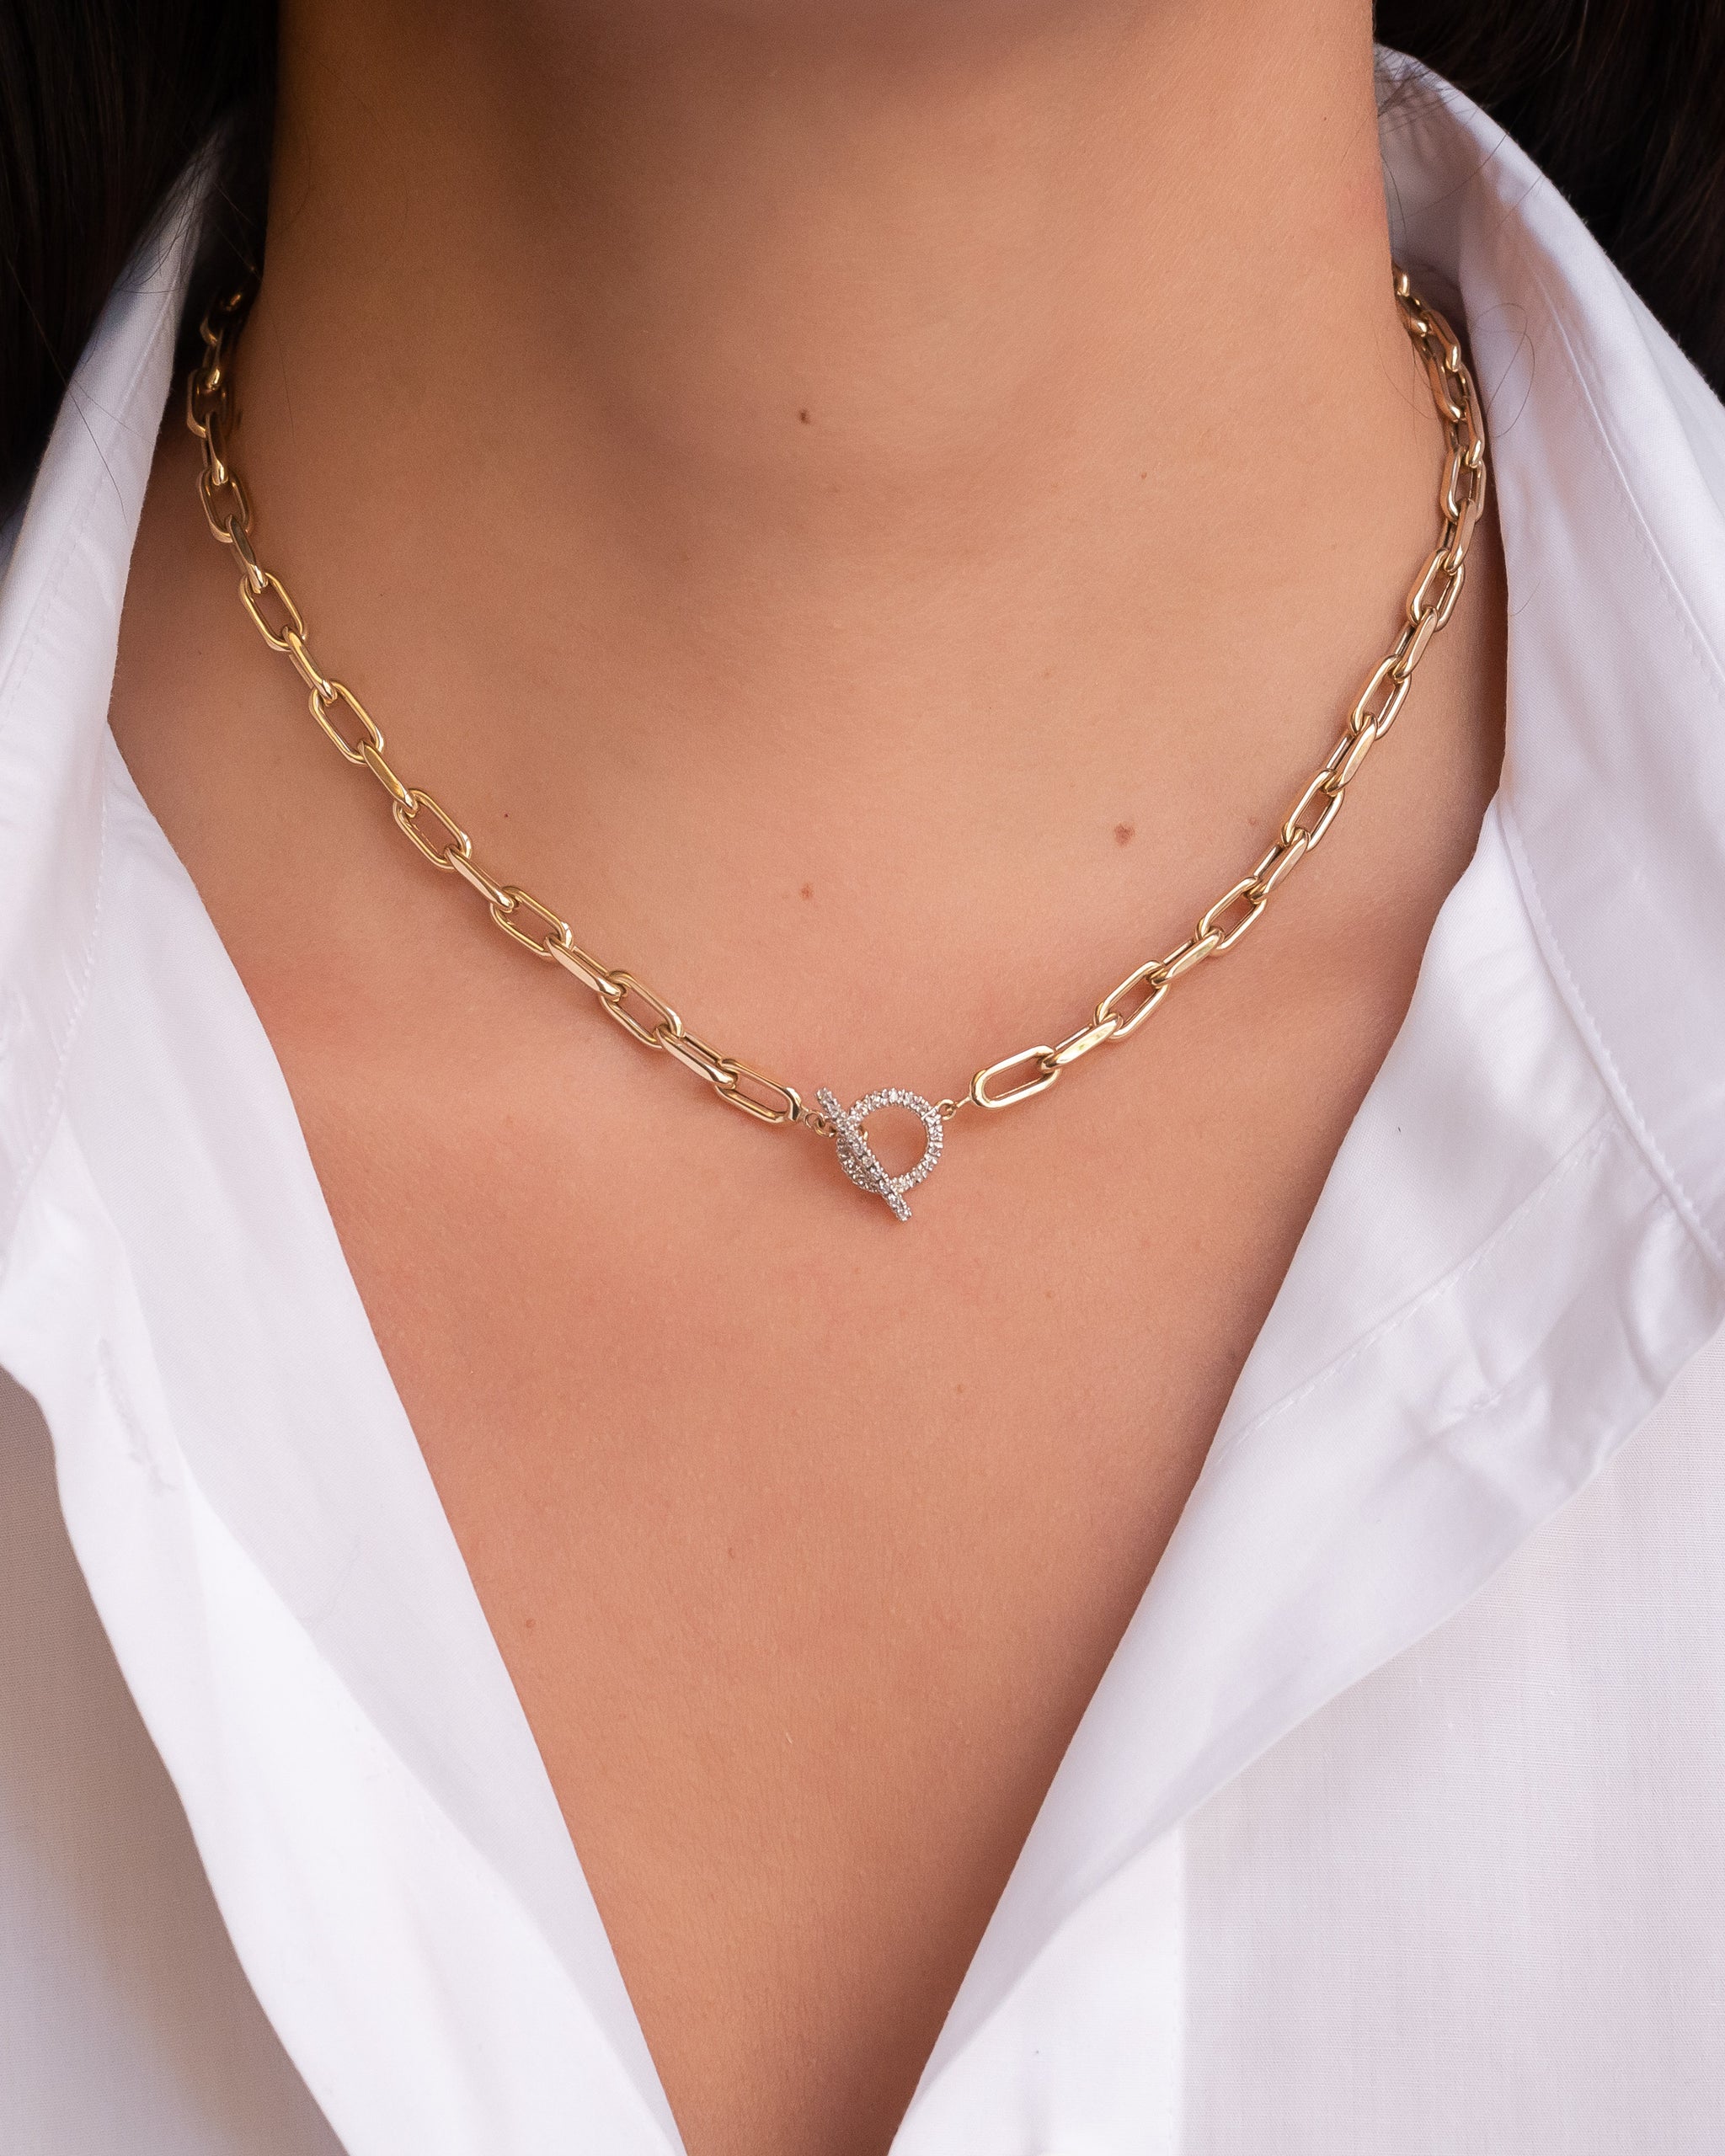 Gold Toggle Chain Necklace | CRAFTD London